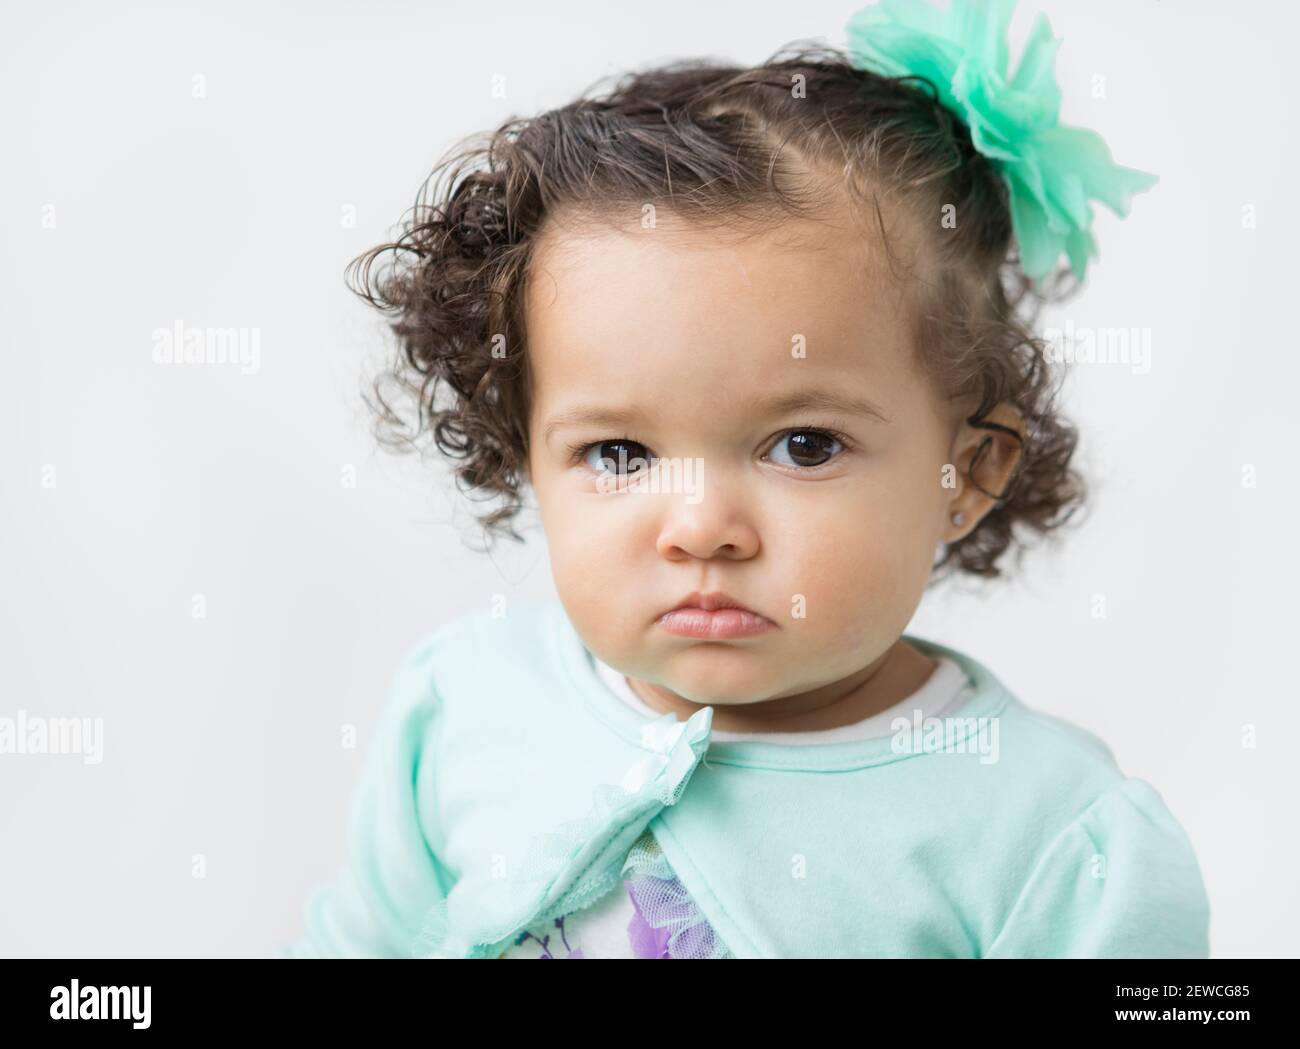 A little girl with a serious, pouting facial expression. Stock Photo